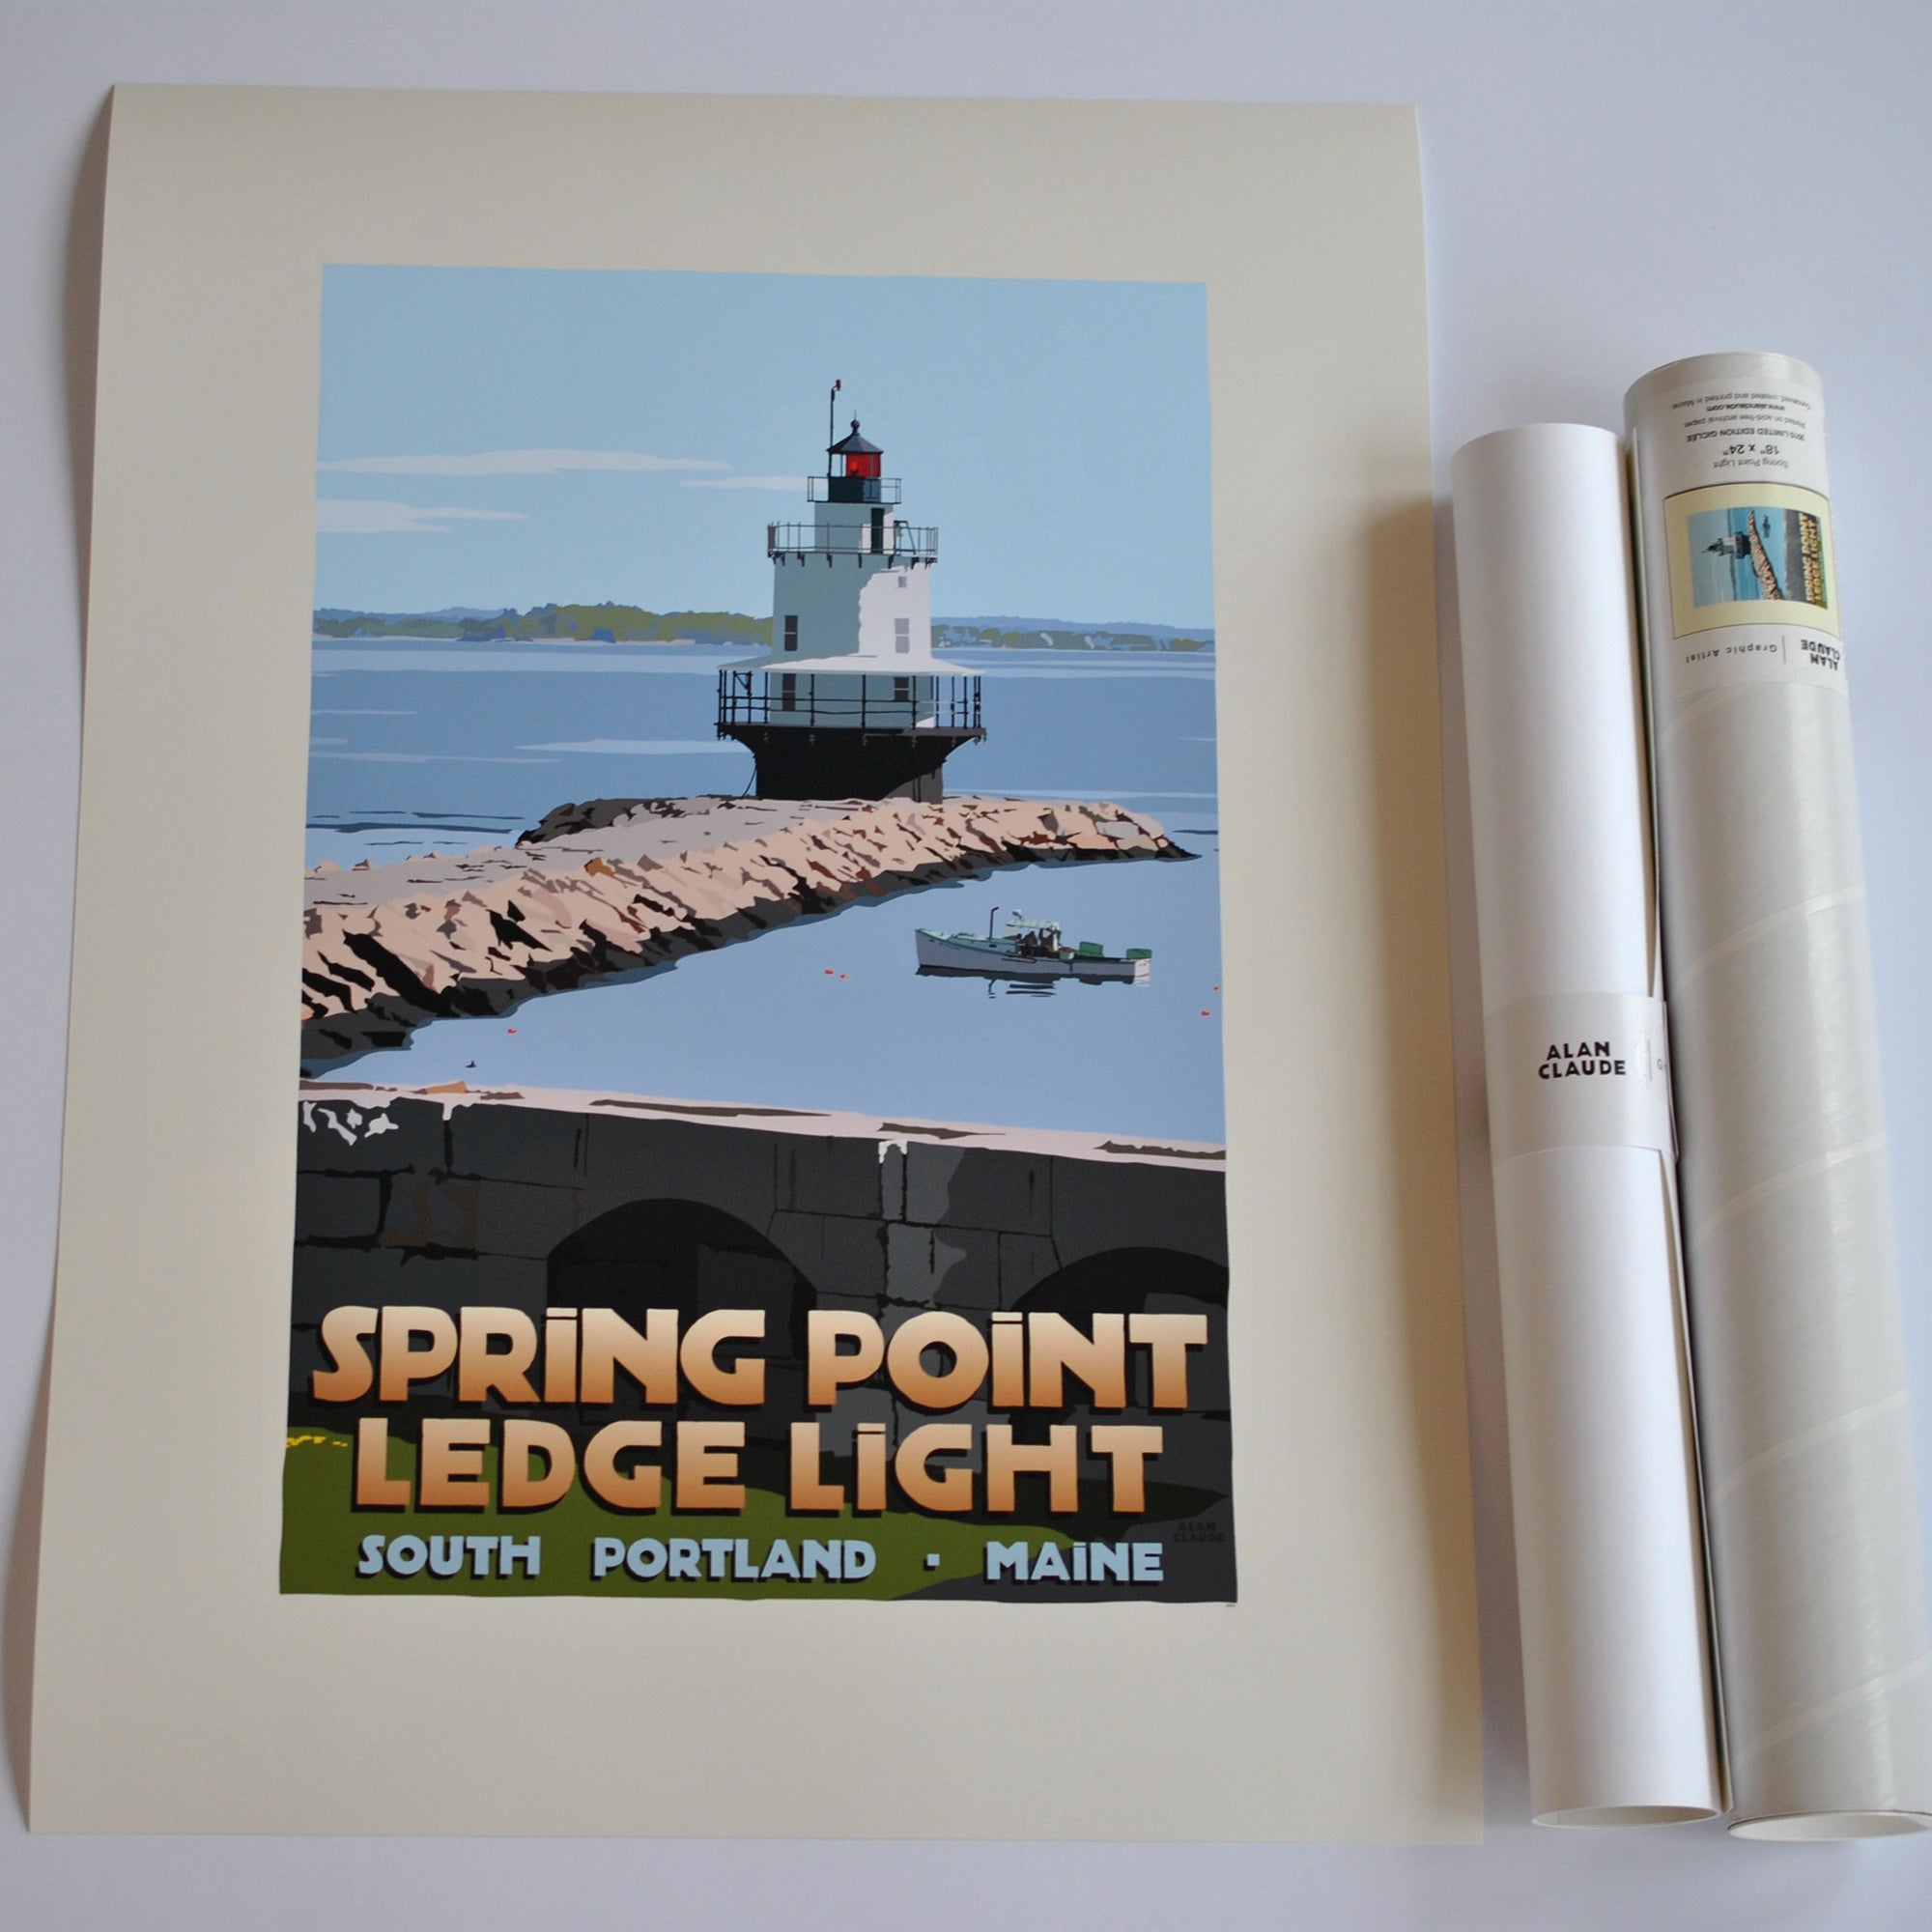 Spring Point Ledge Light Art Print 18" x 24" Travel Poster By Alan Claude - Maine